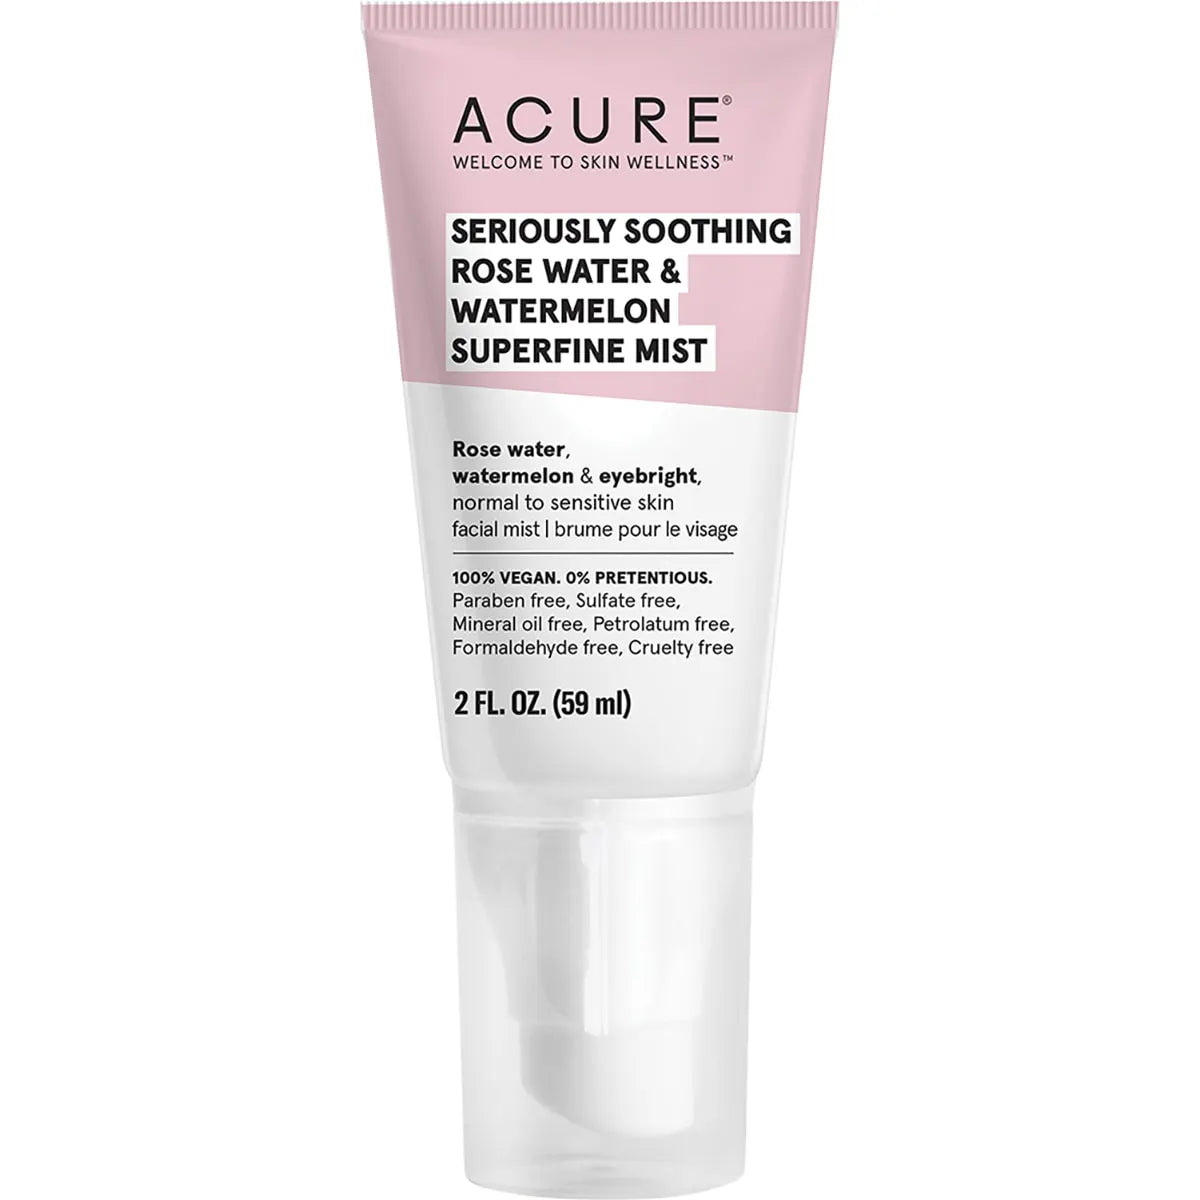 Acure Seriously Soothing Rose & Watermelon Superfine Mist 59ml